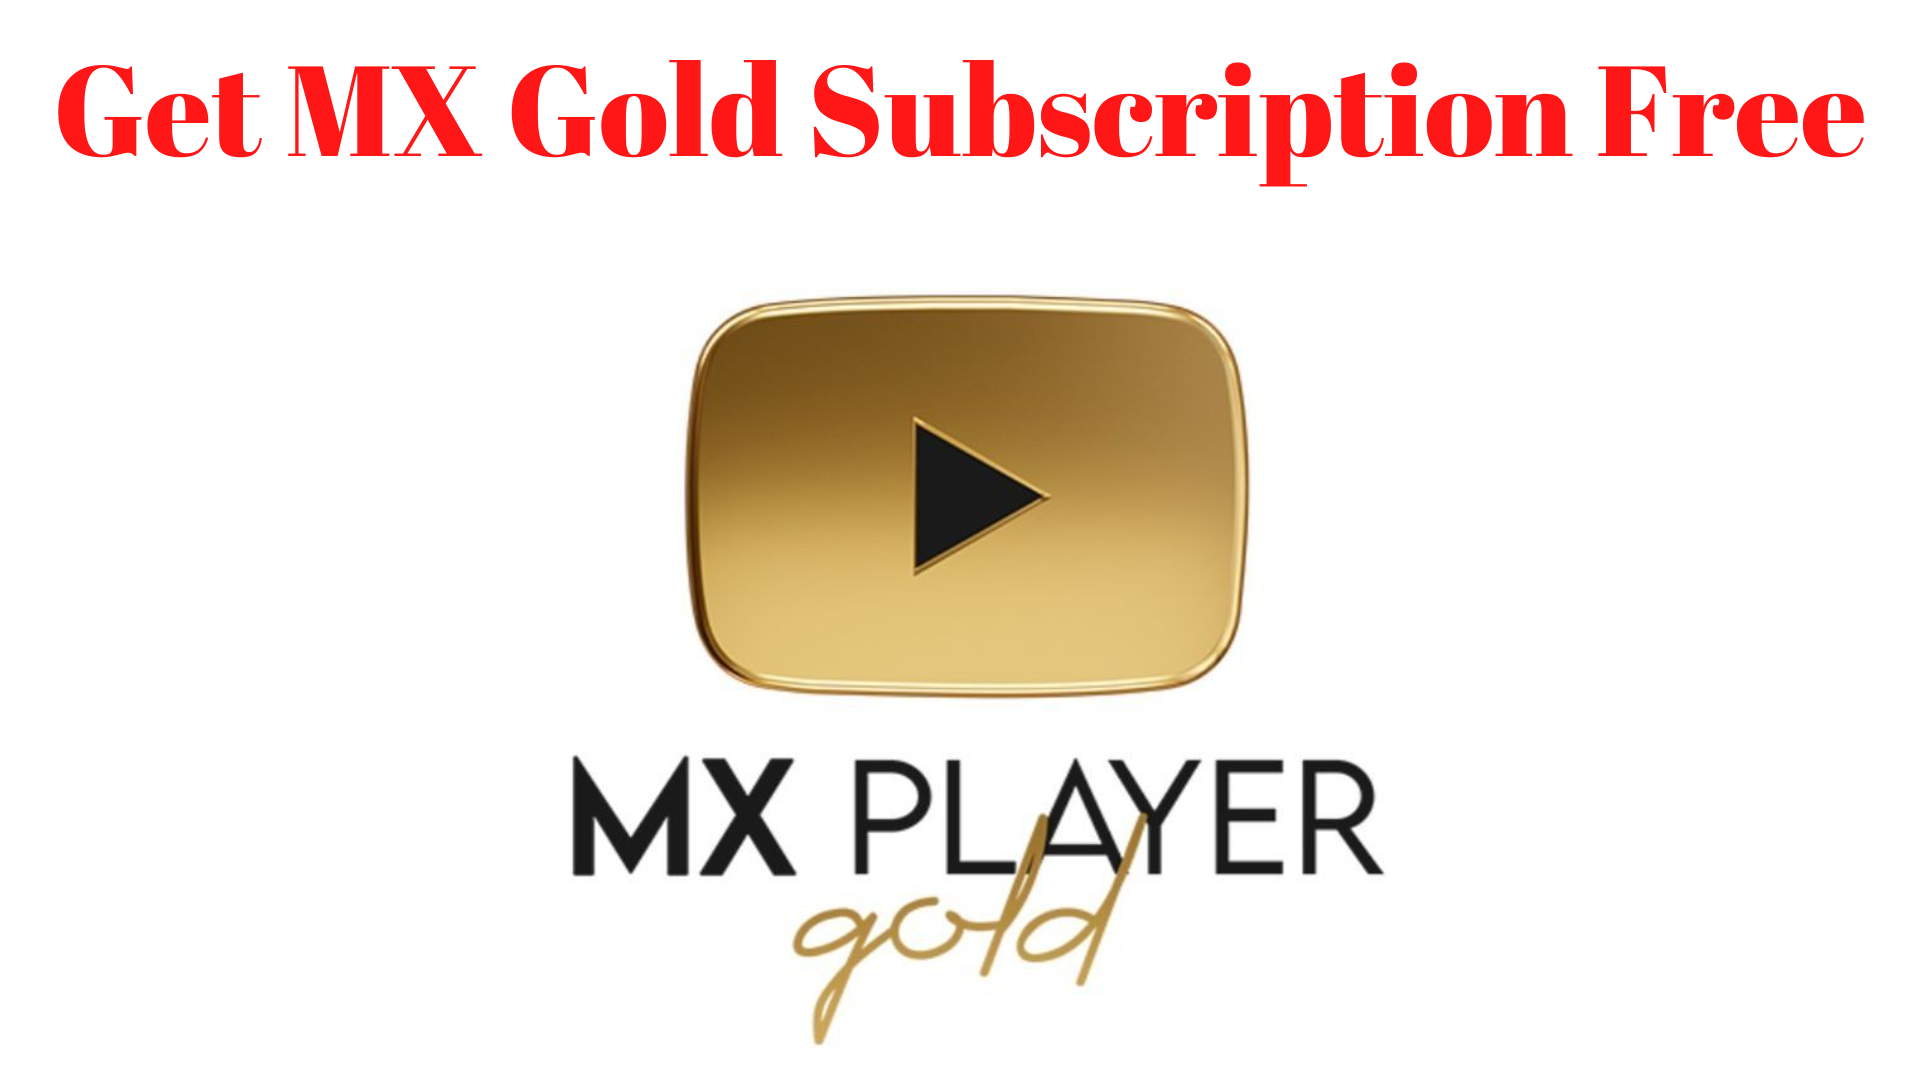 How To Get MX Gold Subscription Free?